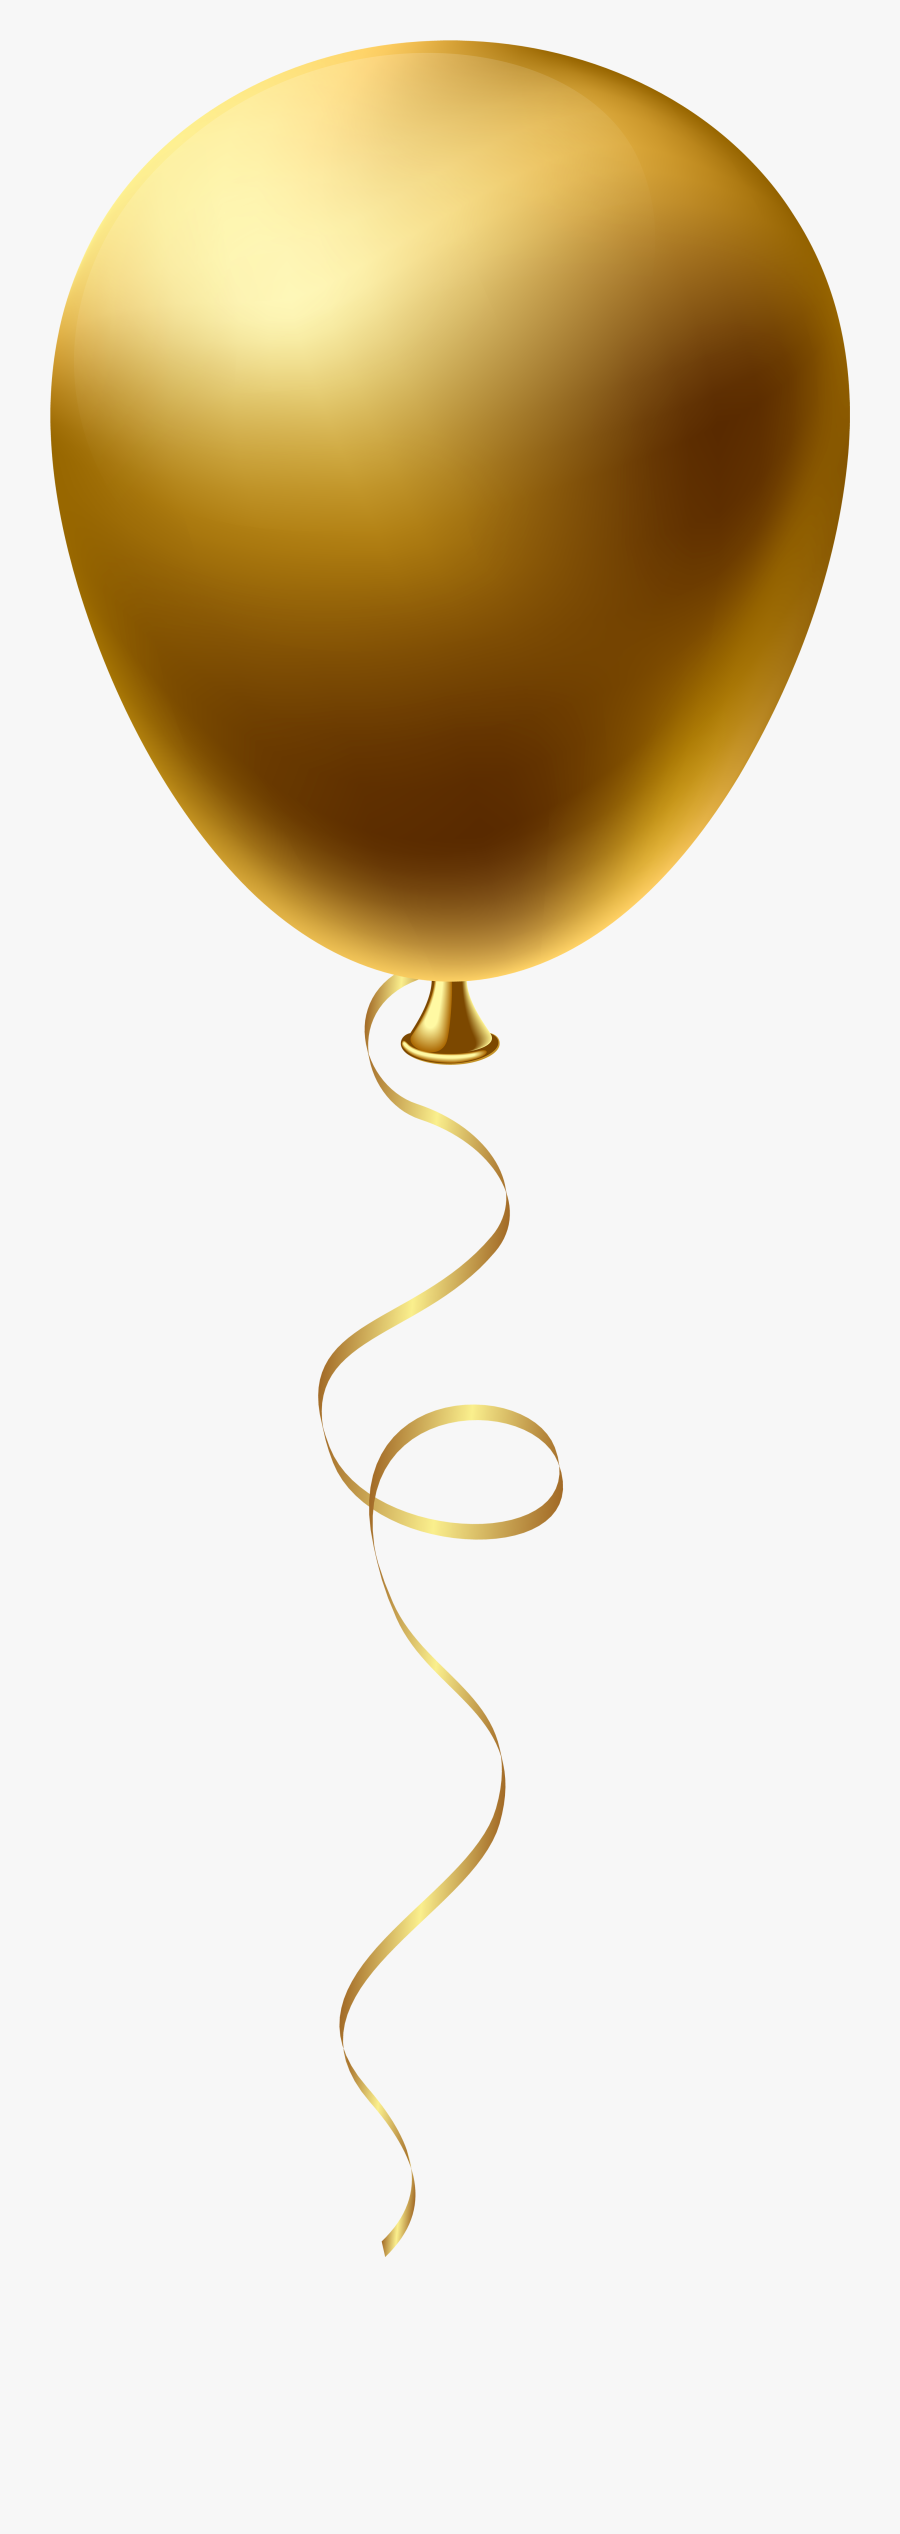 Gold Balloons Png - Gold Balloon Transparent Background , Free ...